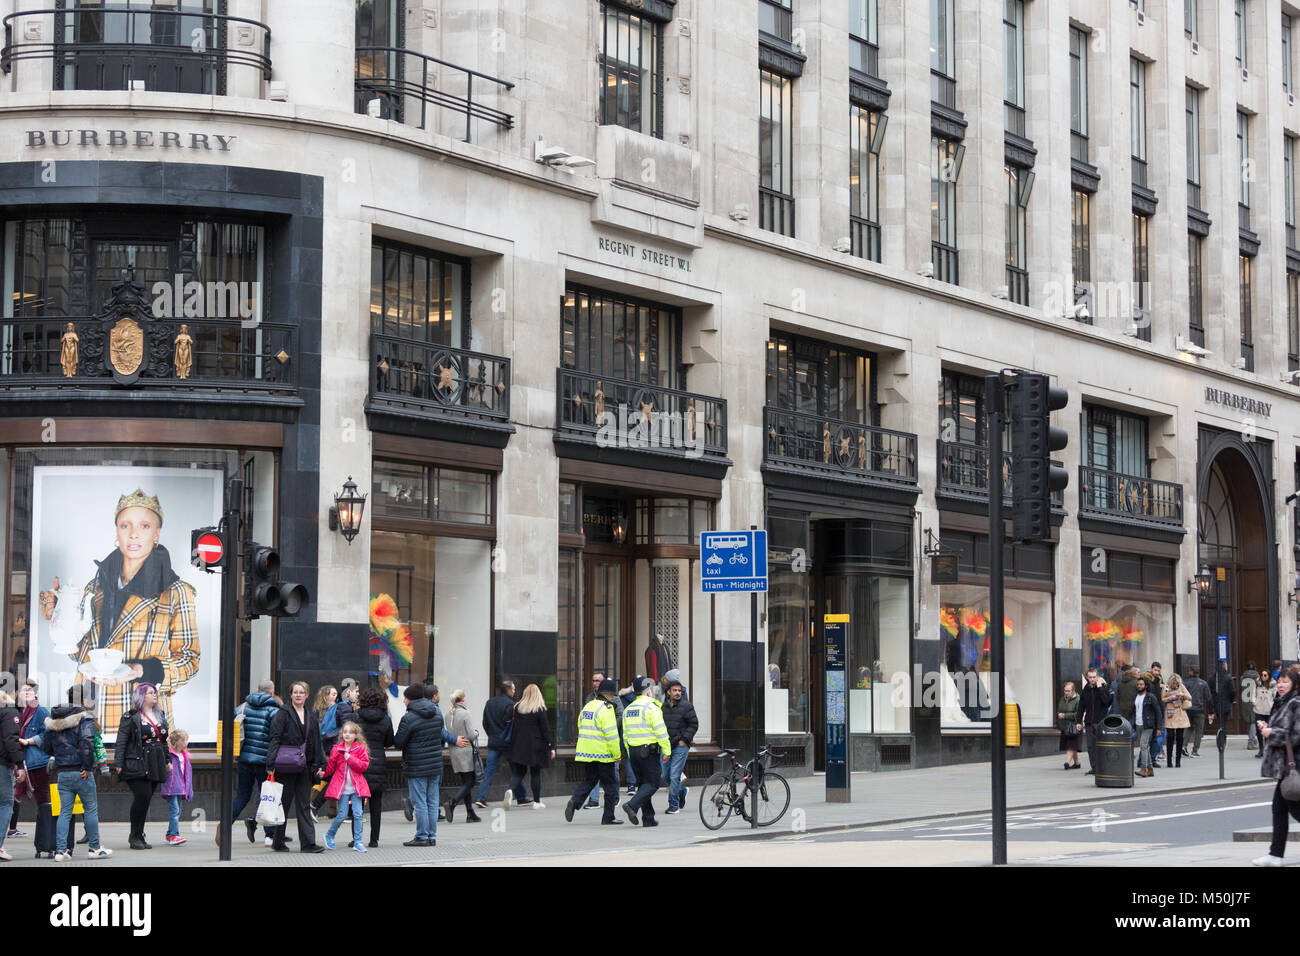 Burberry Store London Stock Photos & Burberry Store London Stock Images ...